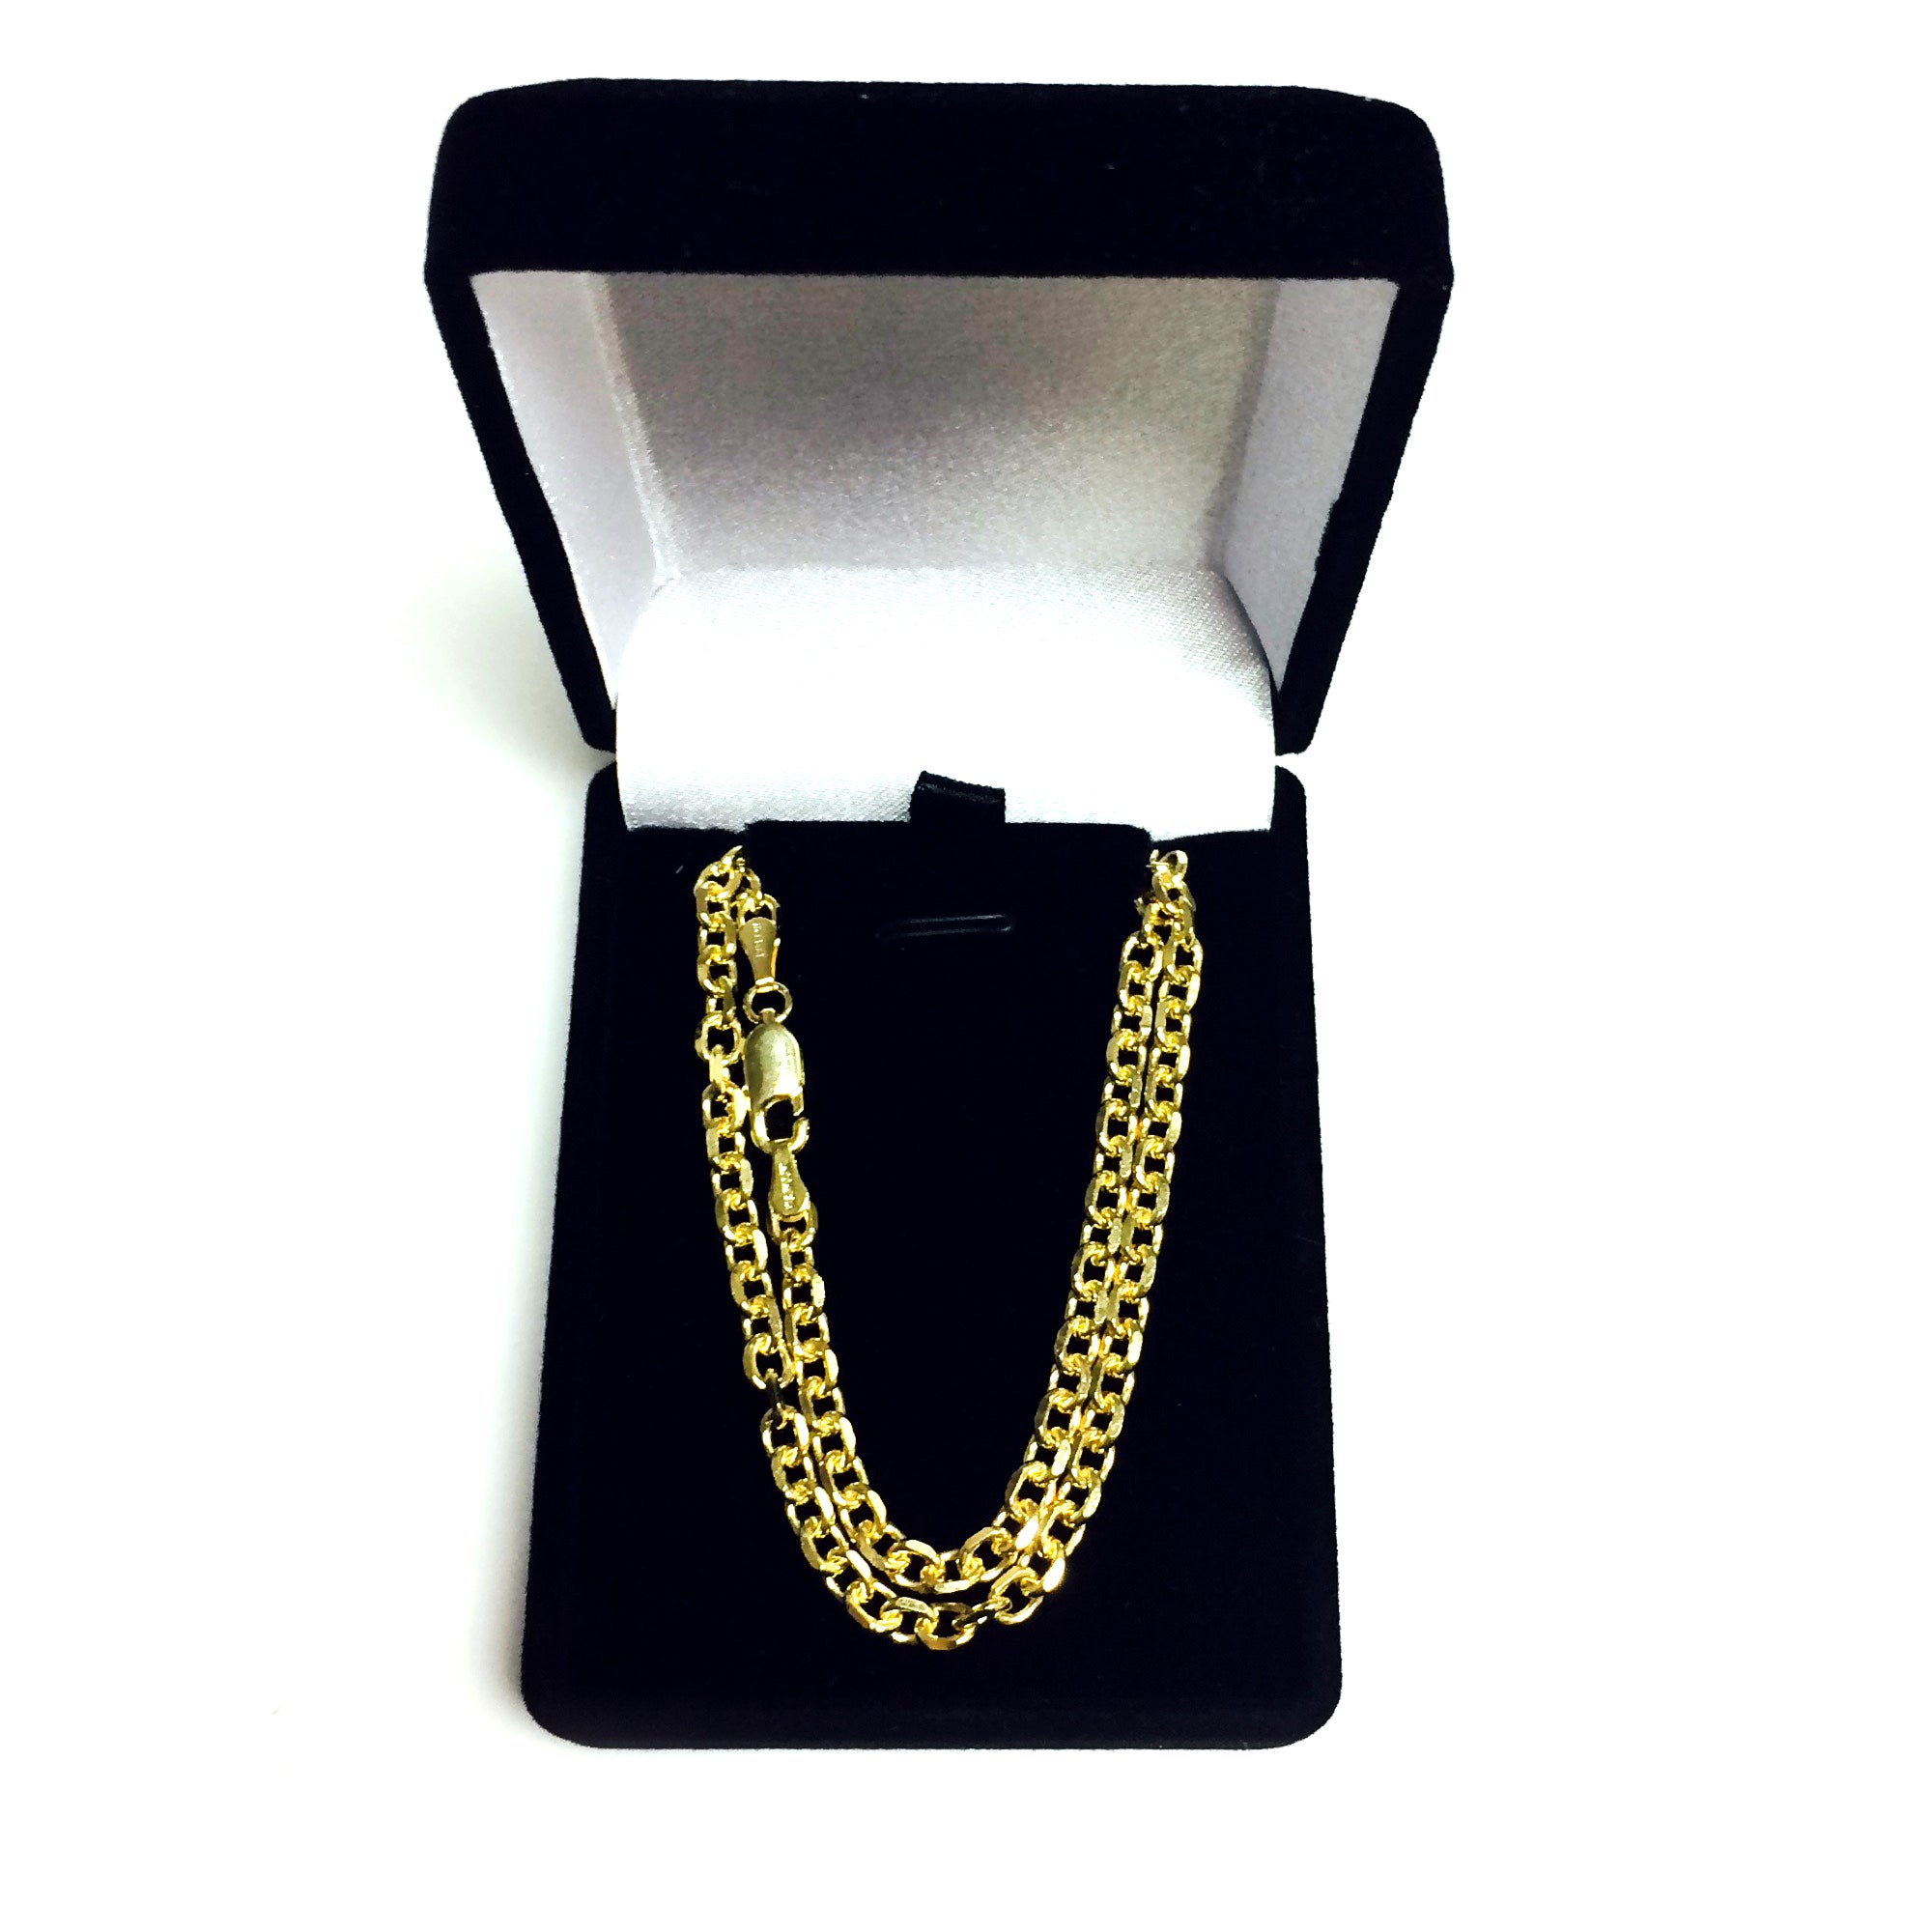 14k Yellow Gold Cable Link Chain Necklace, 4.0mm fine designer jewelry for men and women